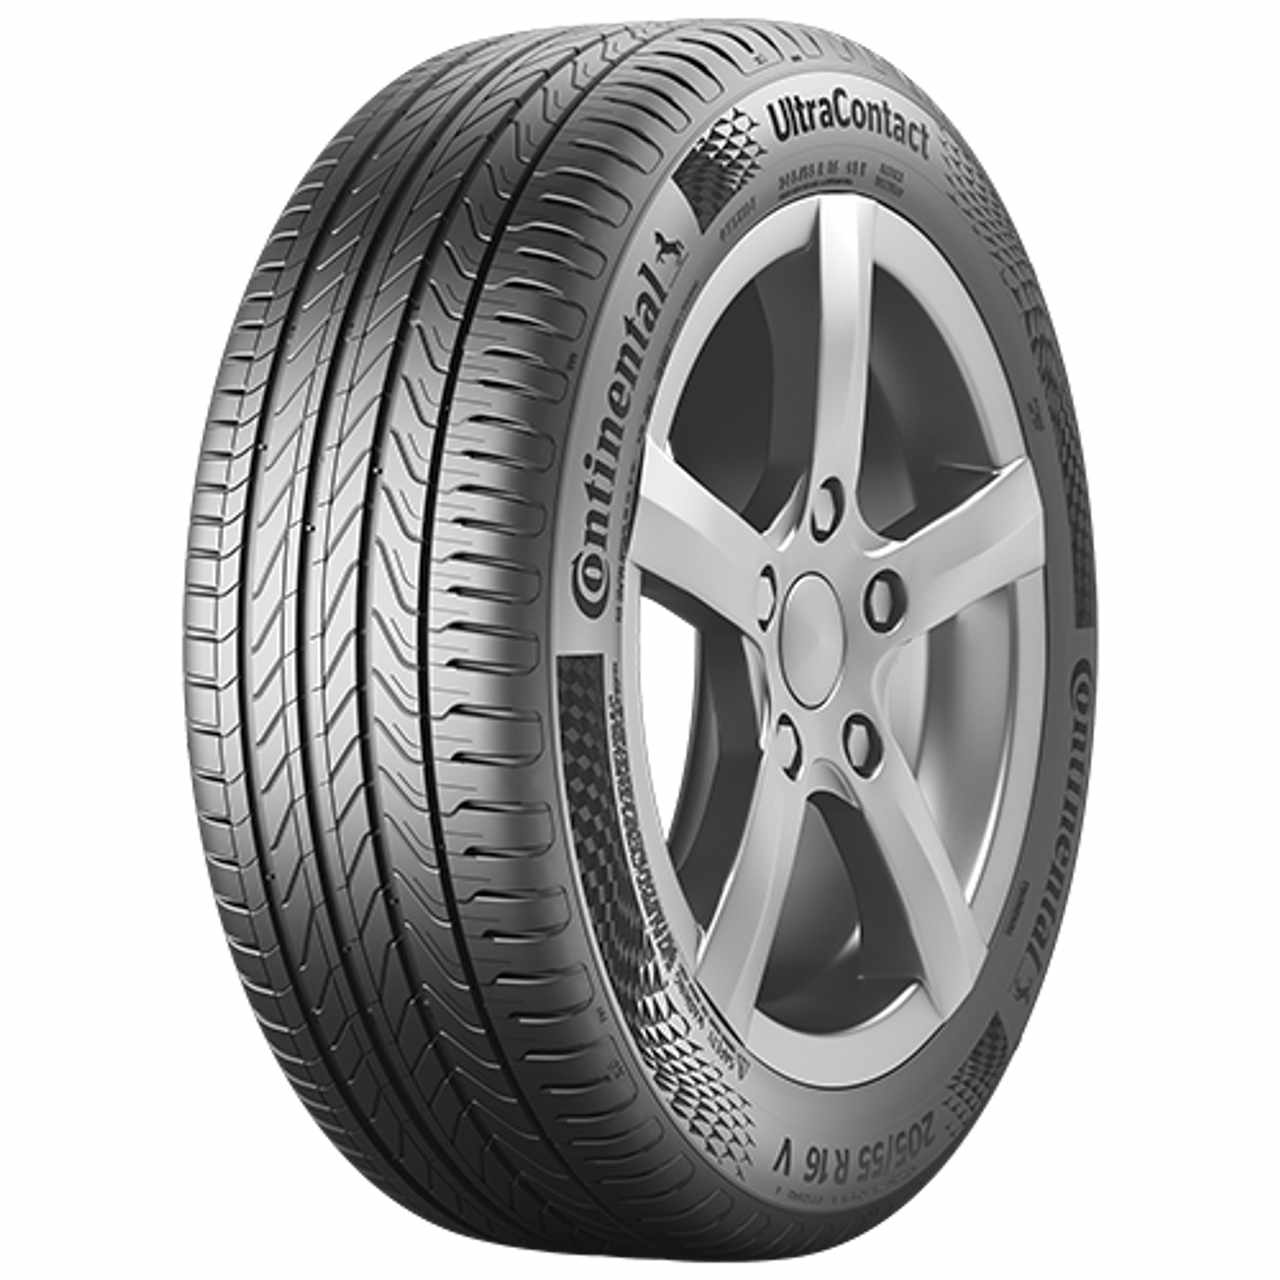 CONTINENTAL ULTRACONTACT (EVc) 185/60R15 84T BSW